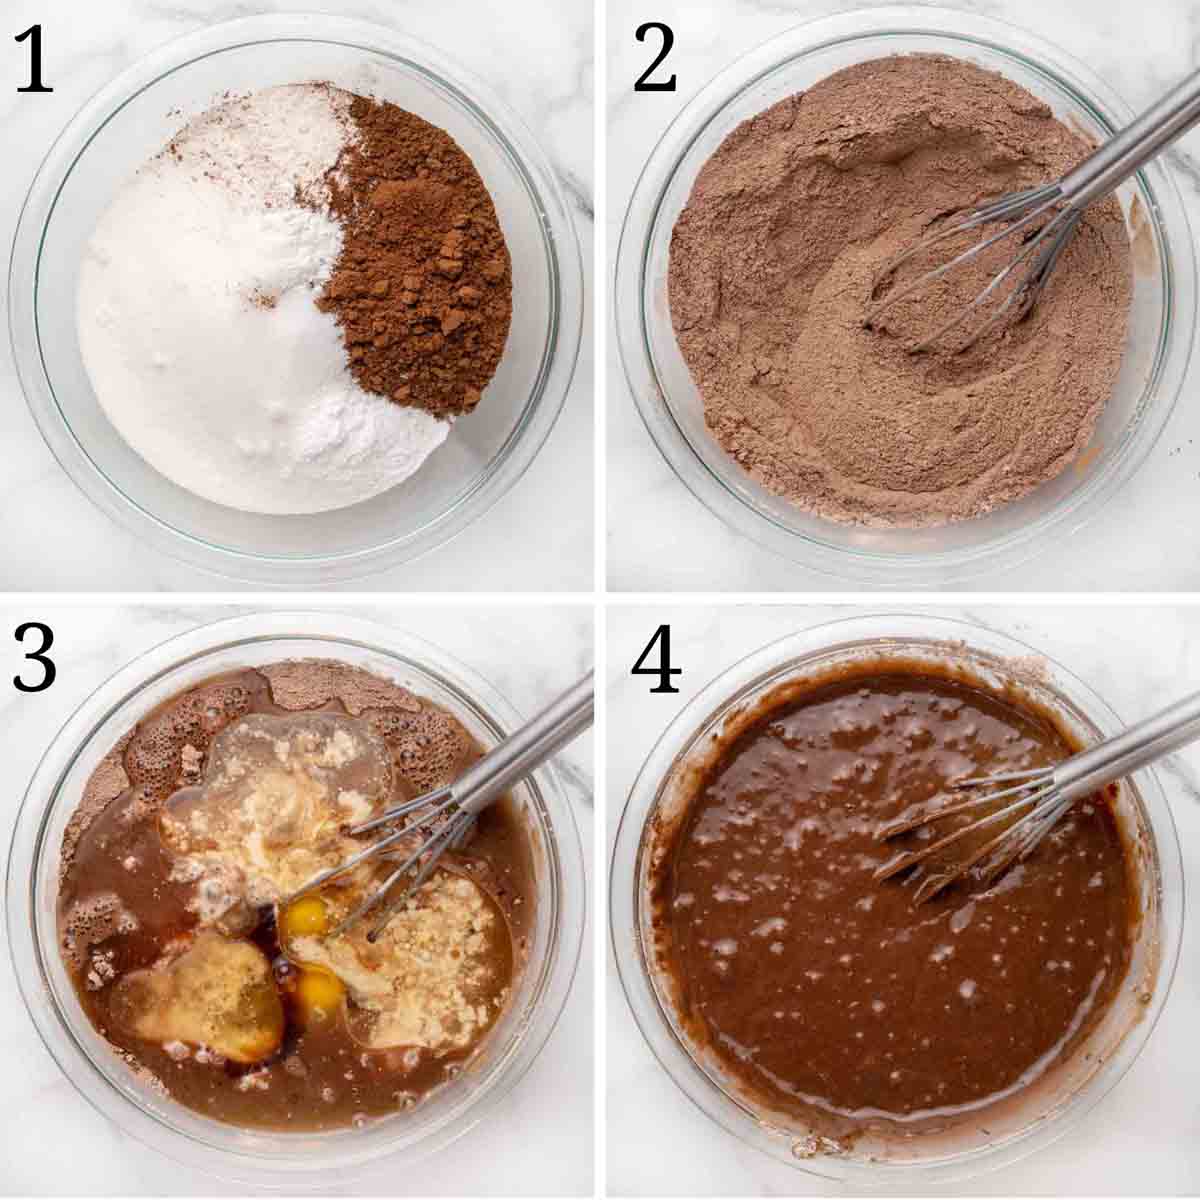 four images showing how to make the chocolate cake batter